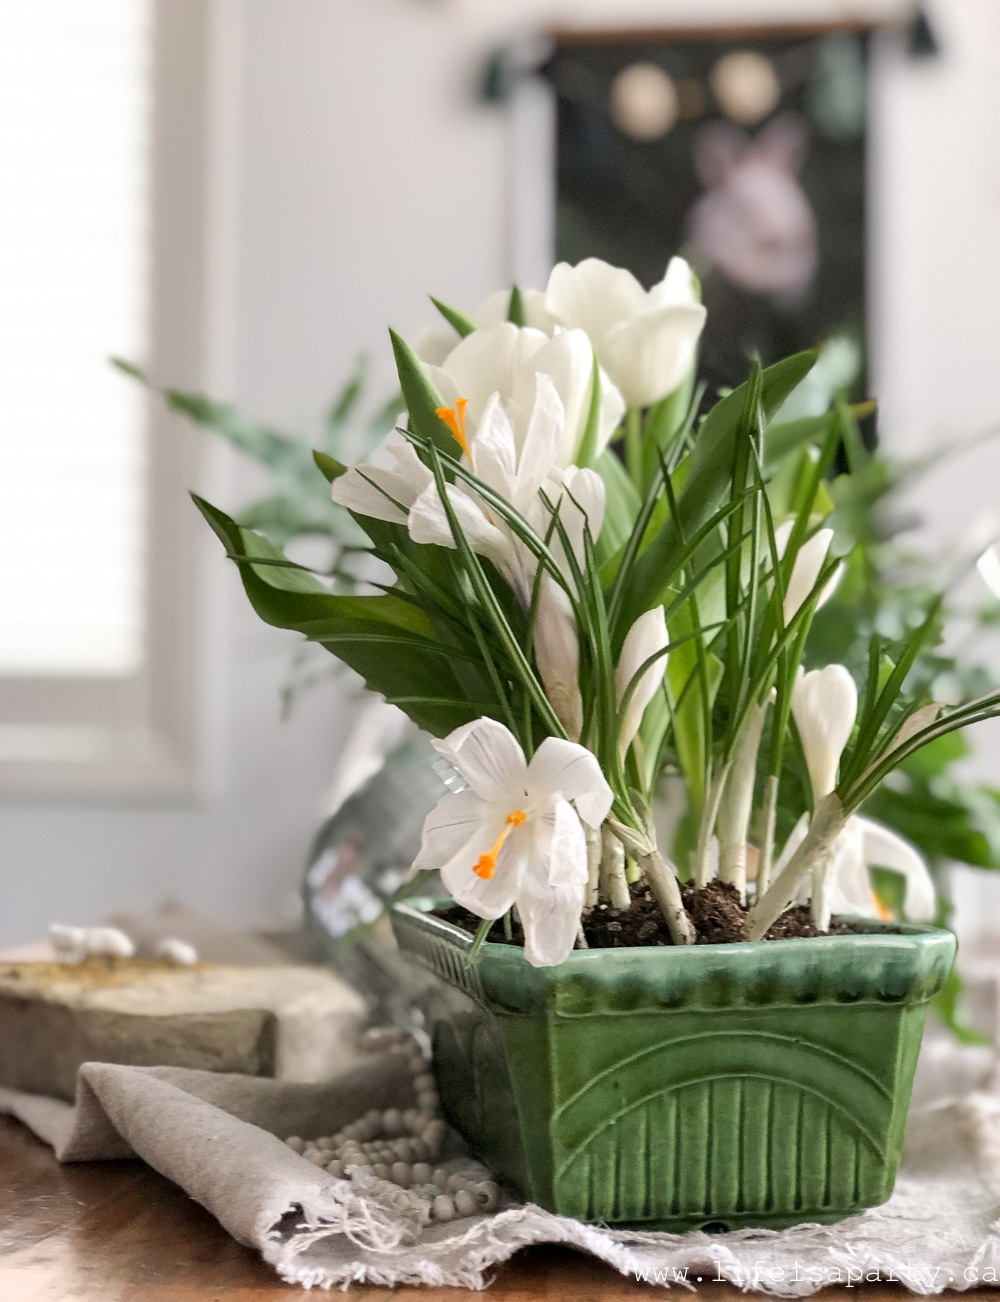 white spring bulbs in a vintage green container